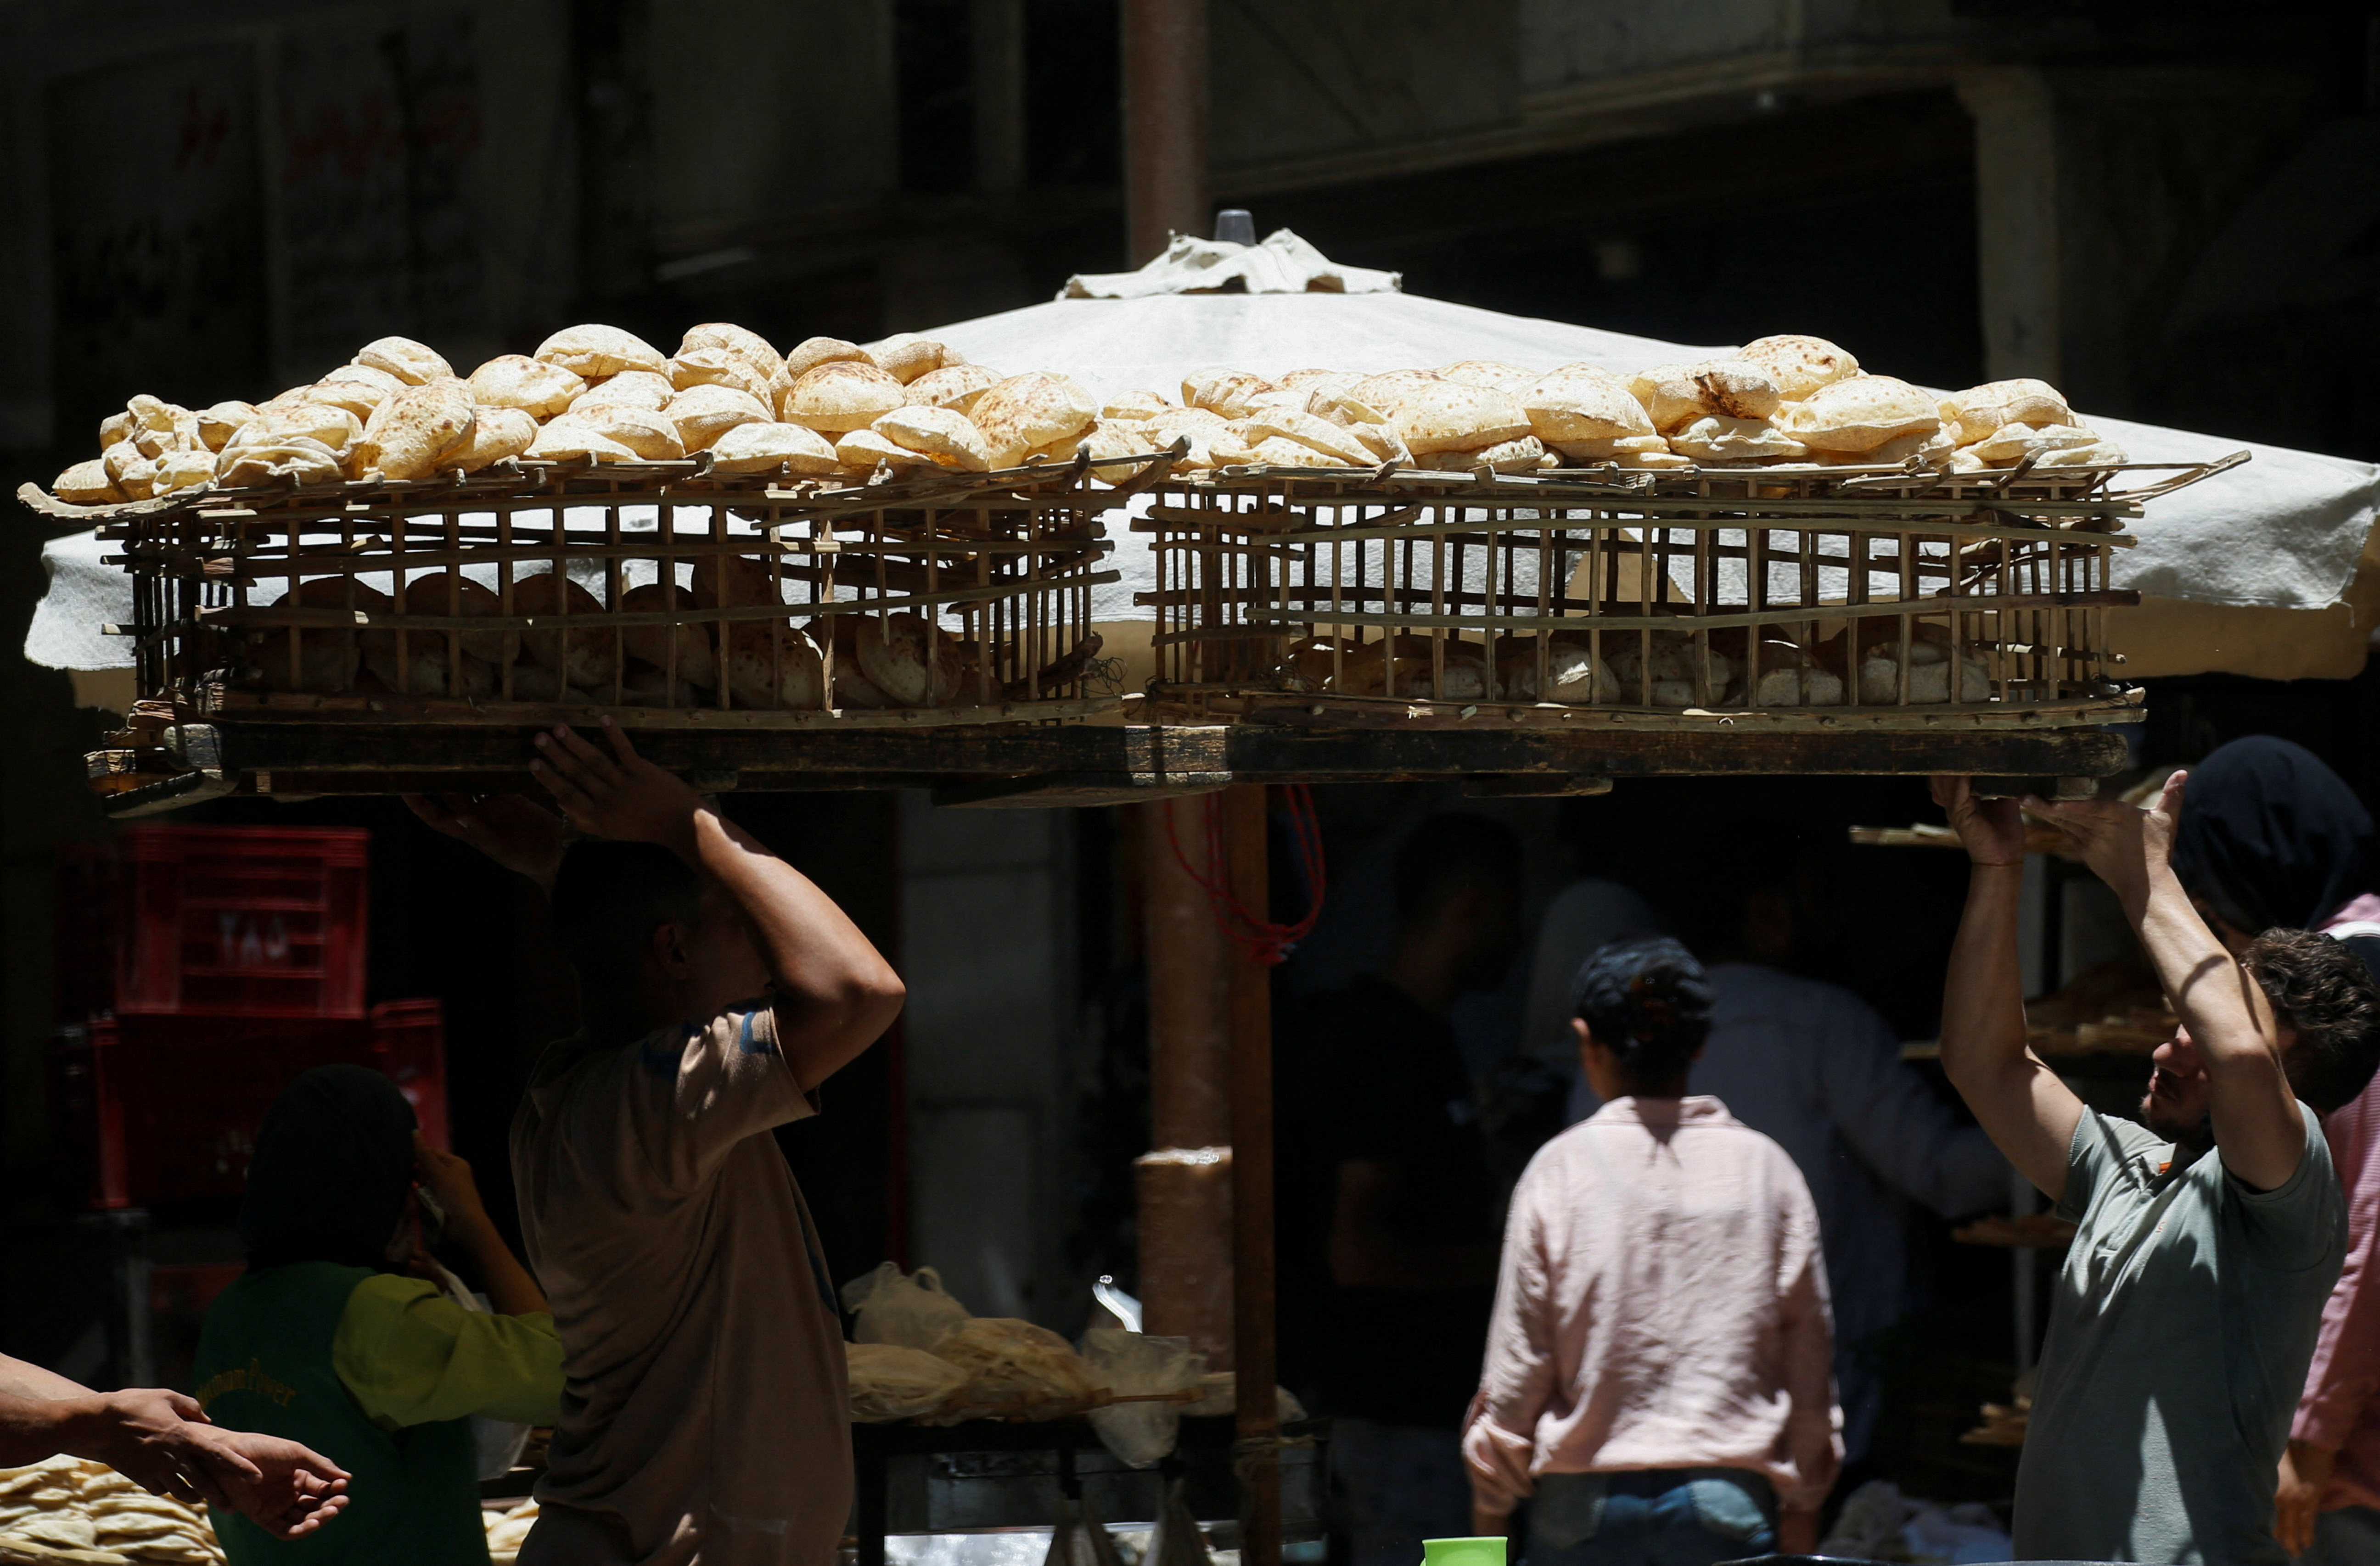 Price of subsidised bread jumped 300% to 20 piasters ($0.0042) from 5 piasters in Cairo